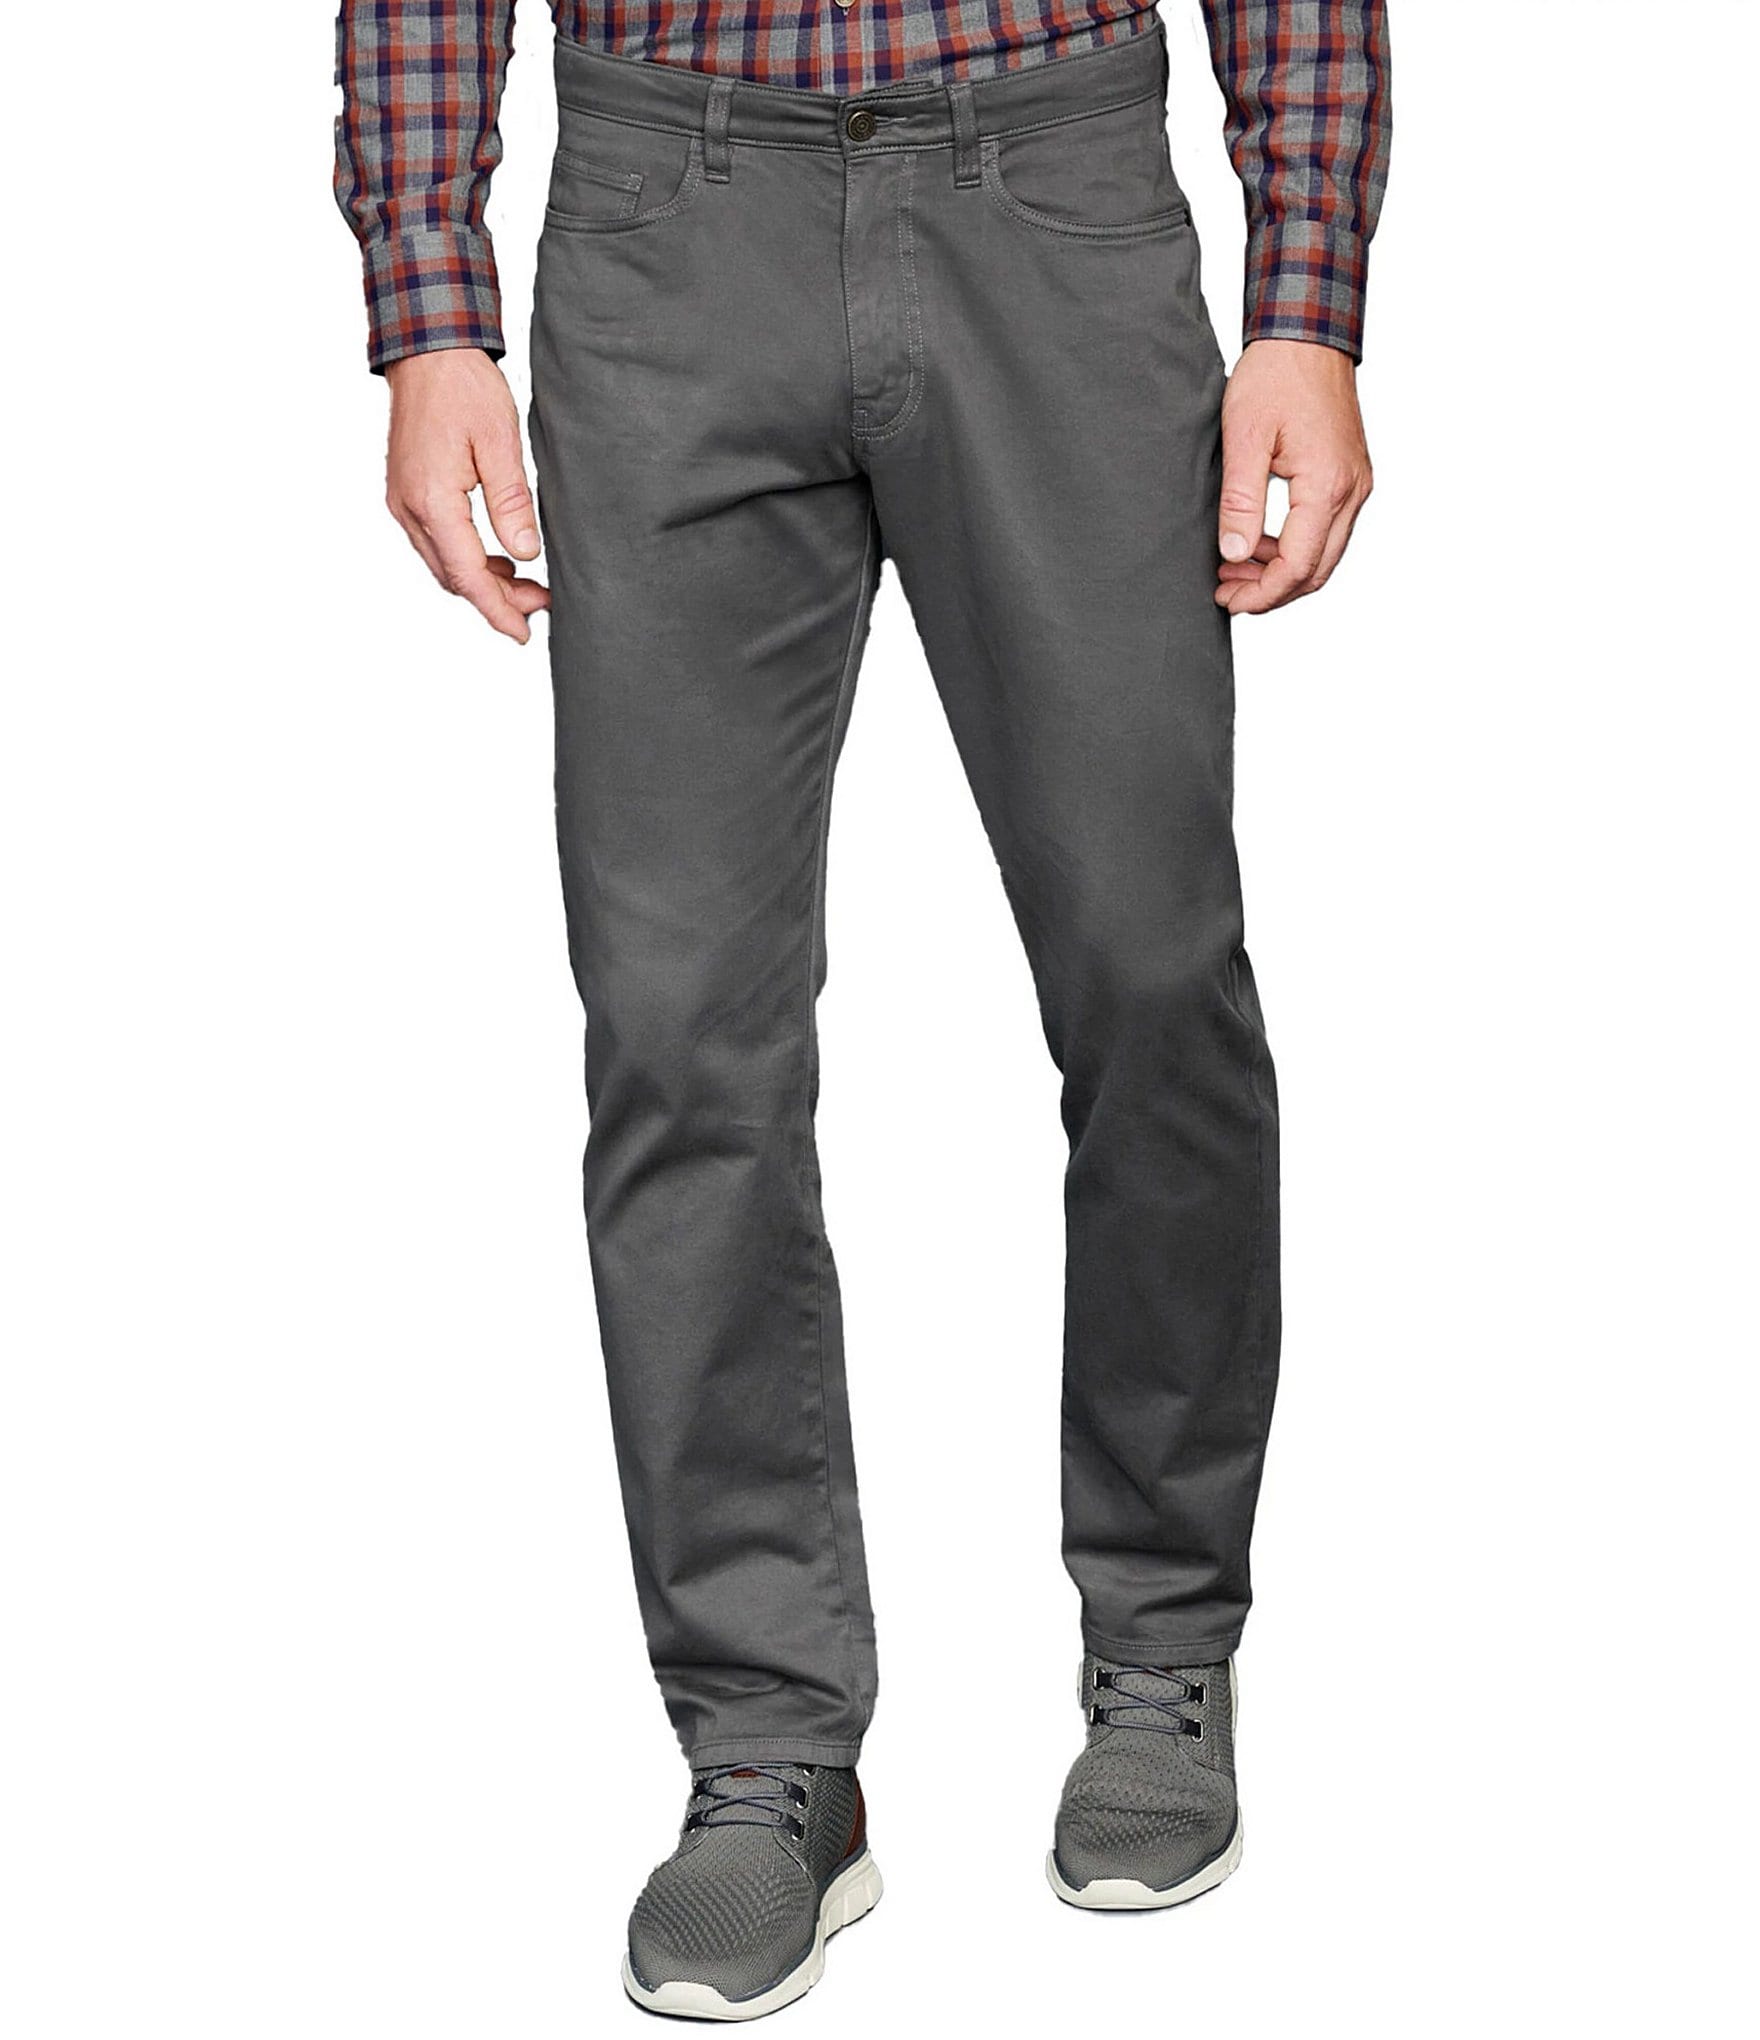 As Is Denim & Co. Active Printed or Solid Duo Tall Pant w/ Pocket